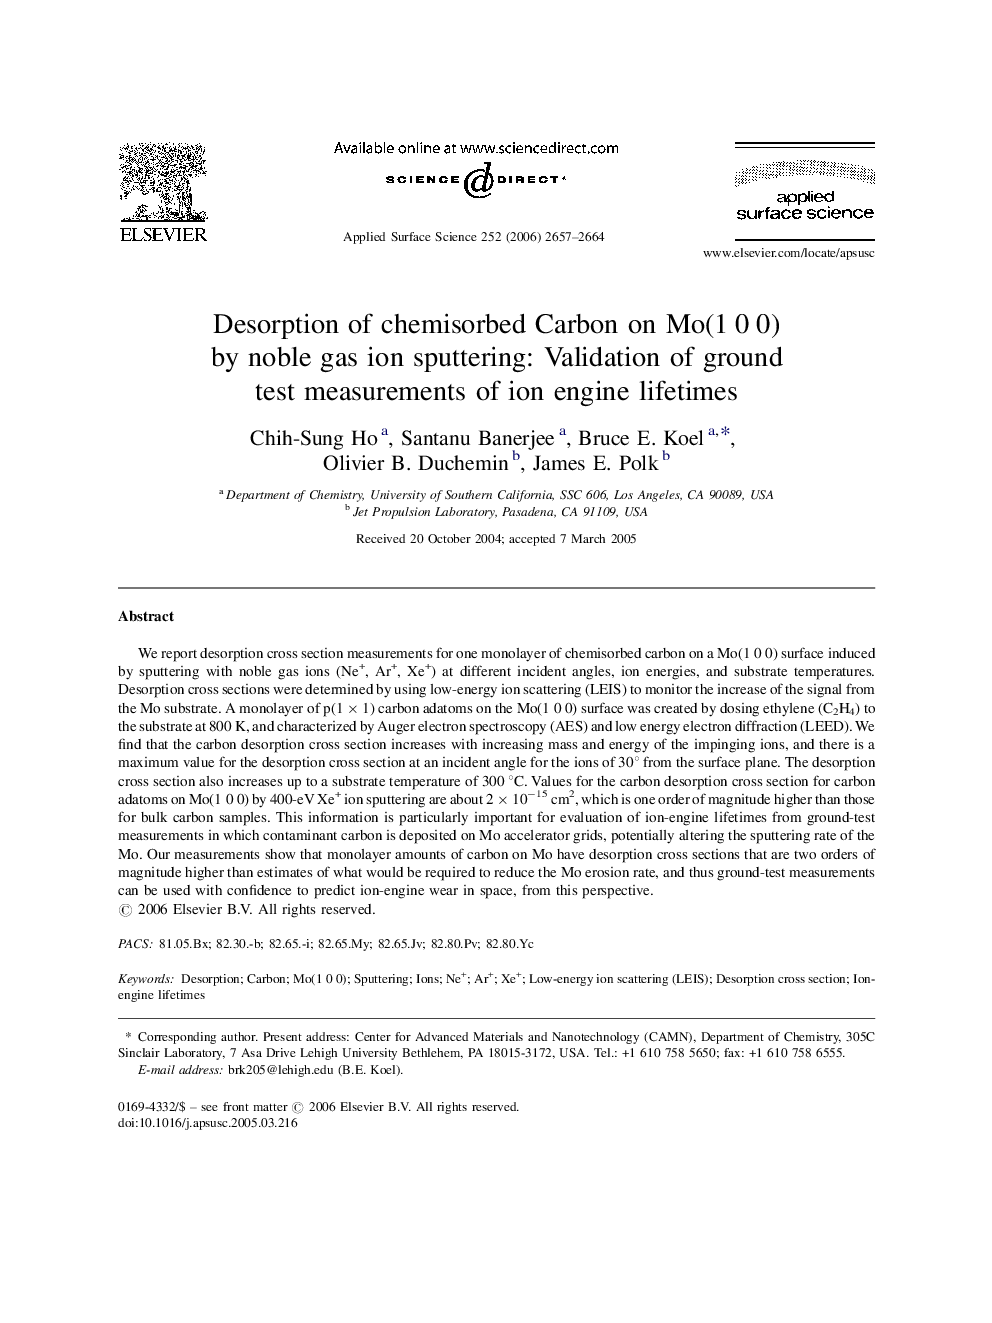 Desorption of chemisorbed Carbon on Mo(1 0 0) by noble gas ion sputtering: Validation of ground test measurements of ion engine lifetimes